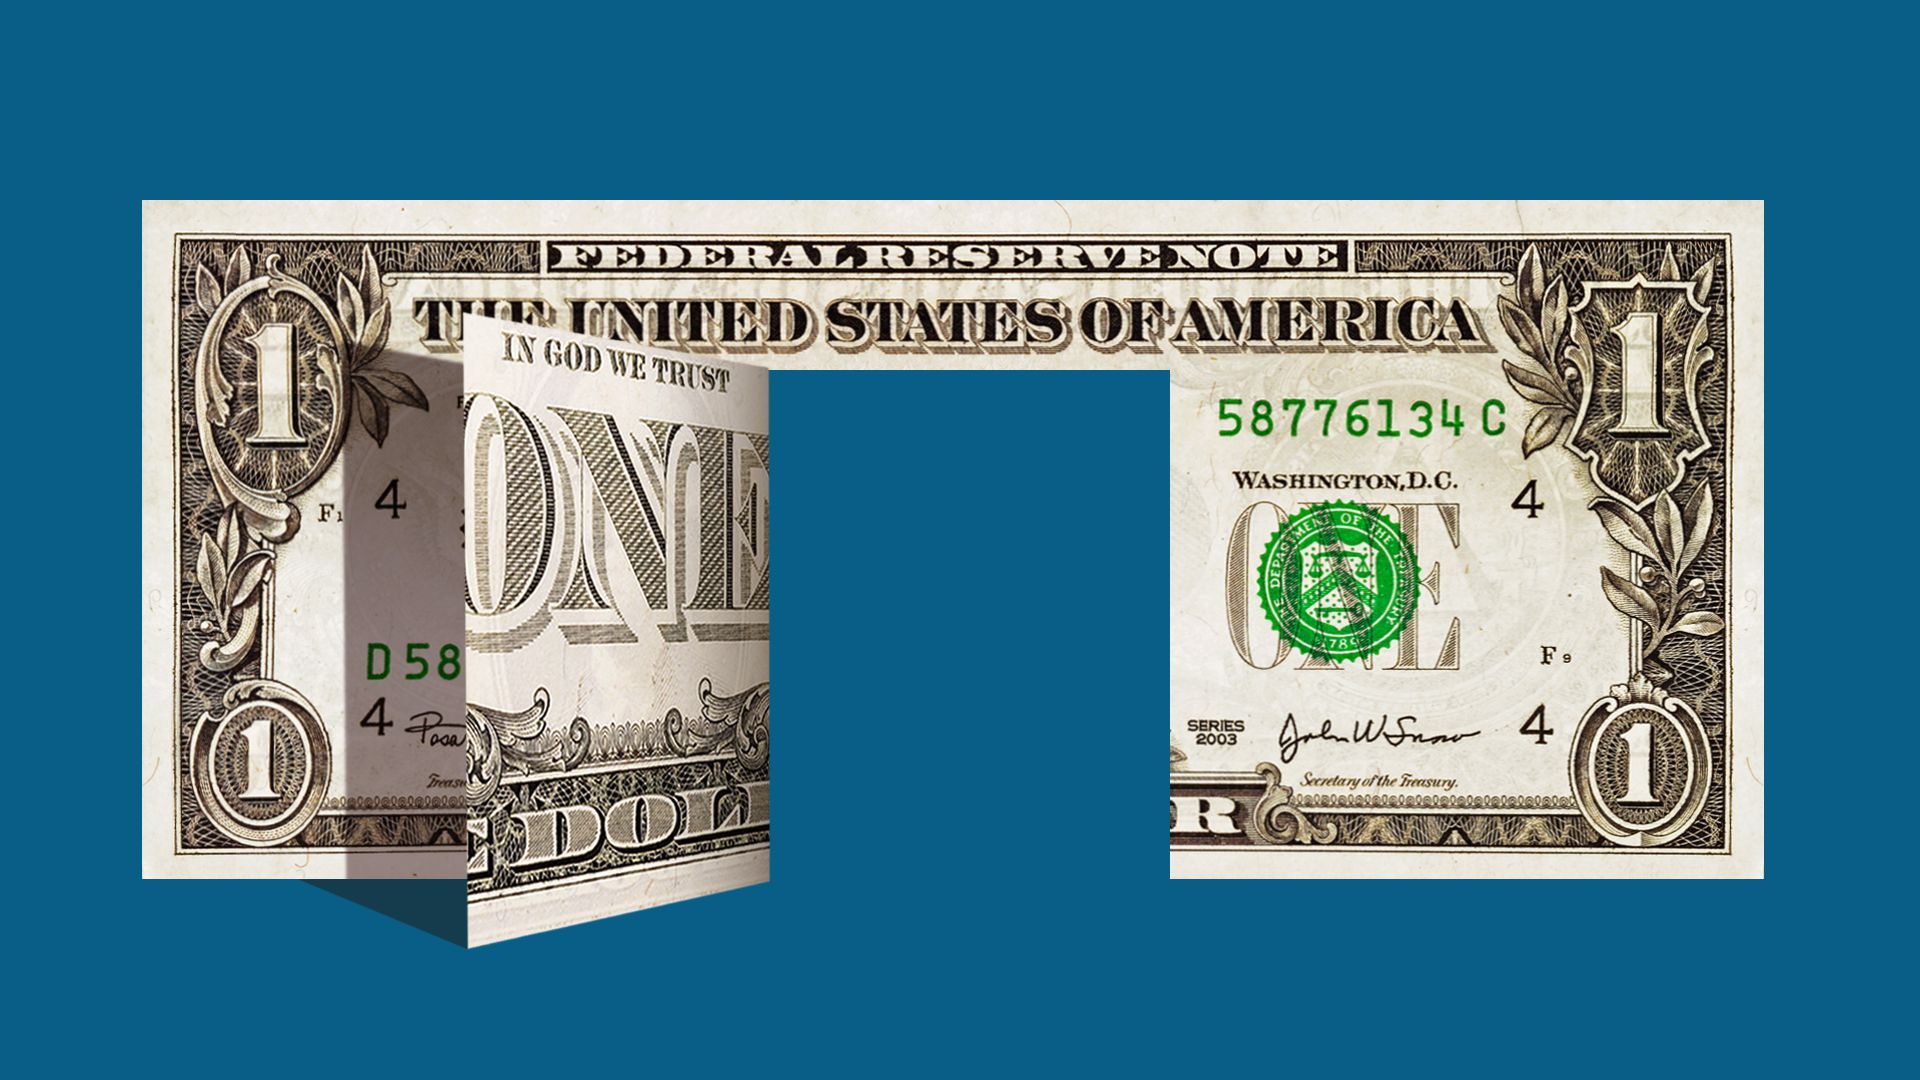 Illustration of a dollar bill with an open door cut out of the center